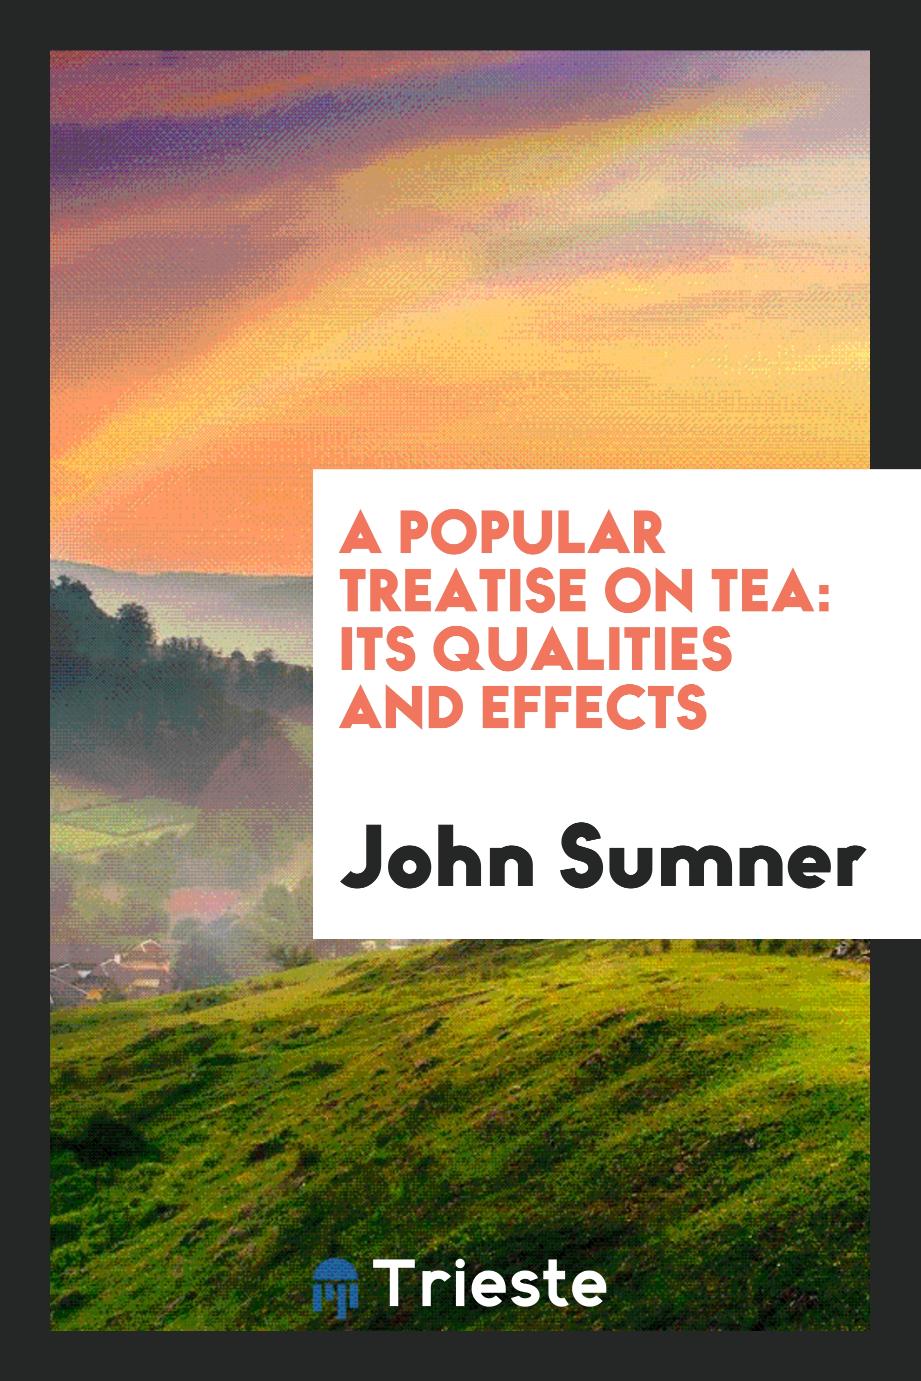 John Sumner - A popular treatise on tea: its qualities and effects